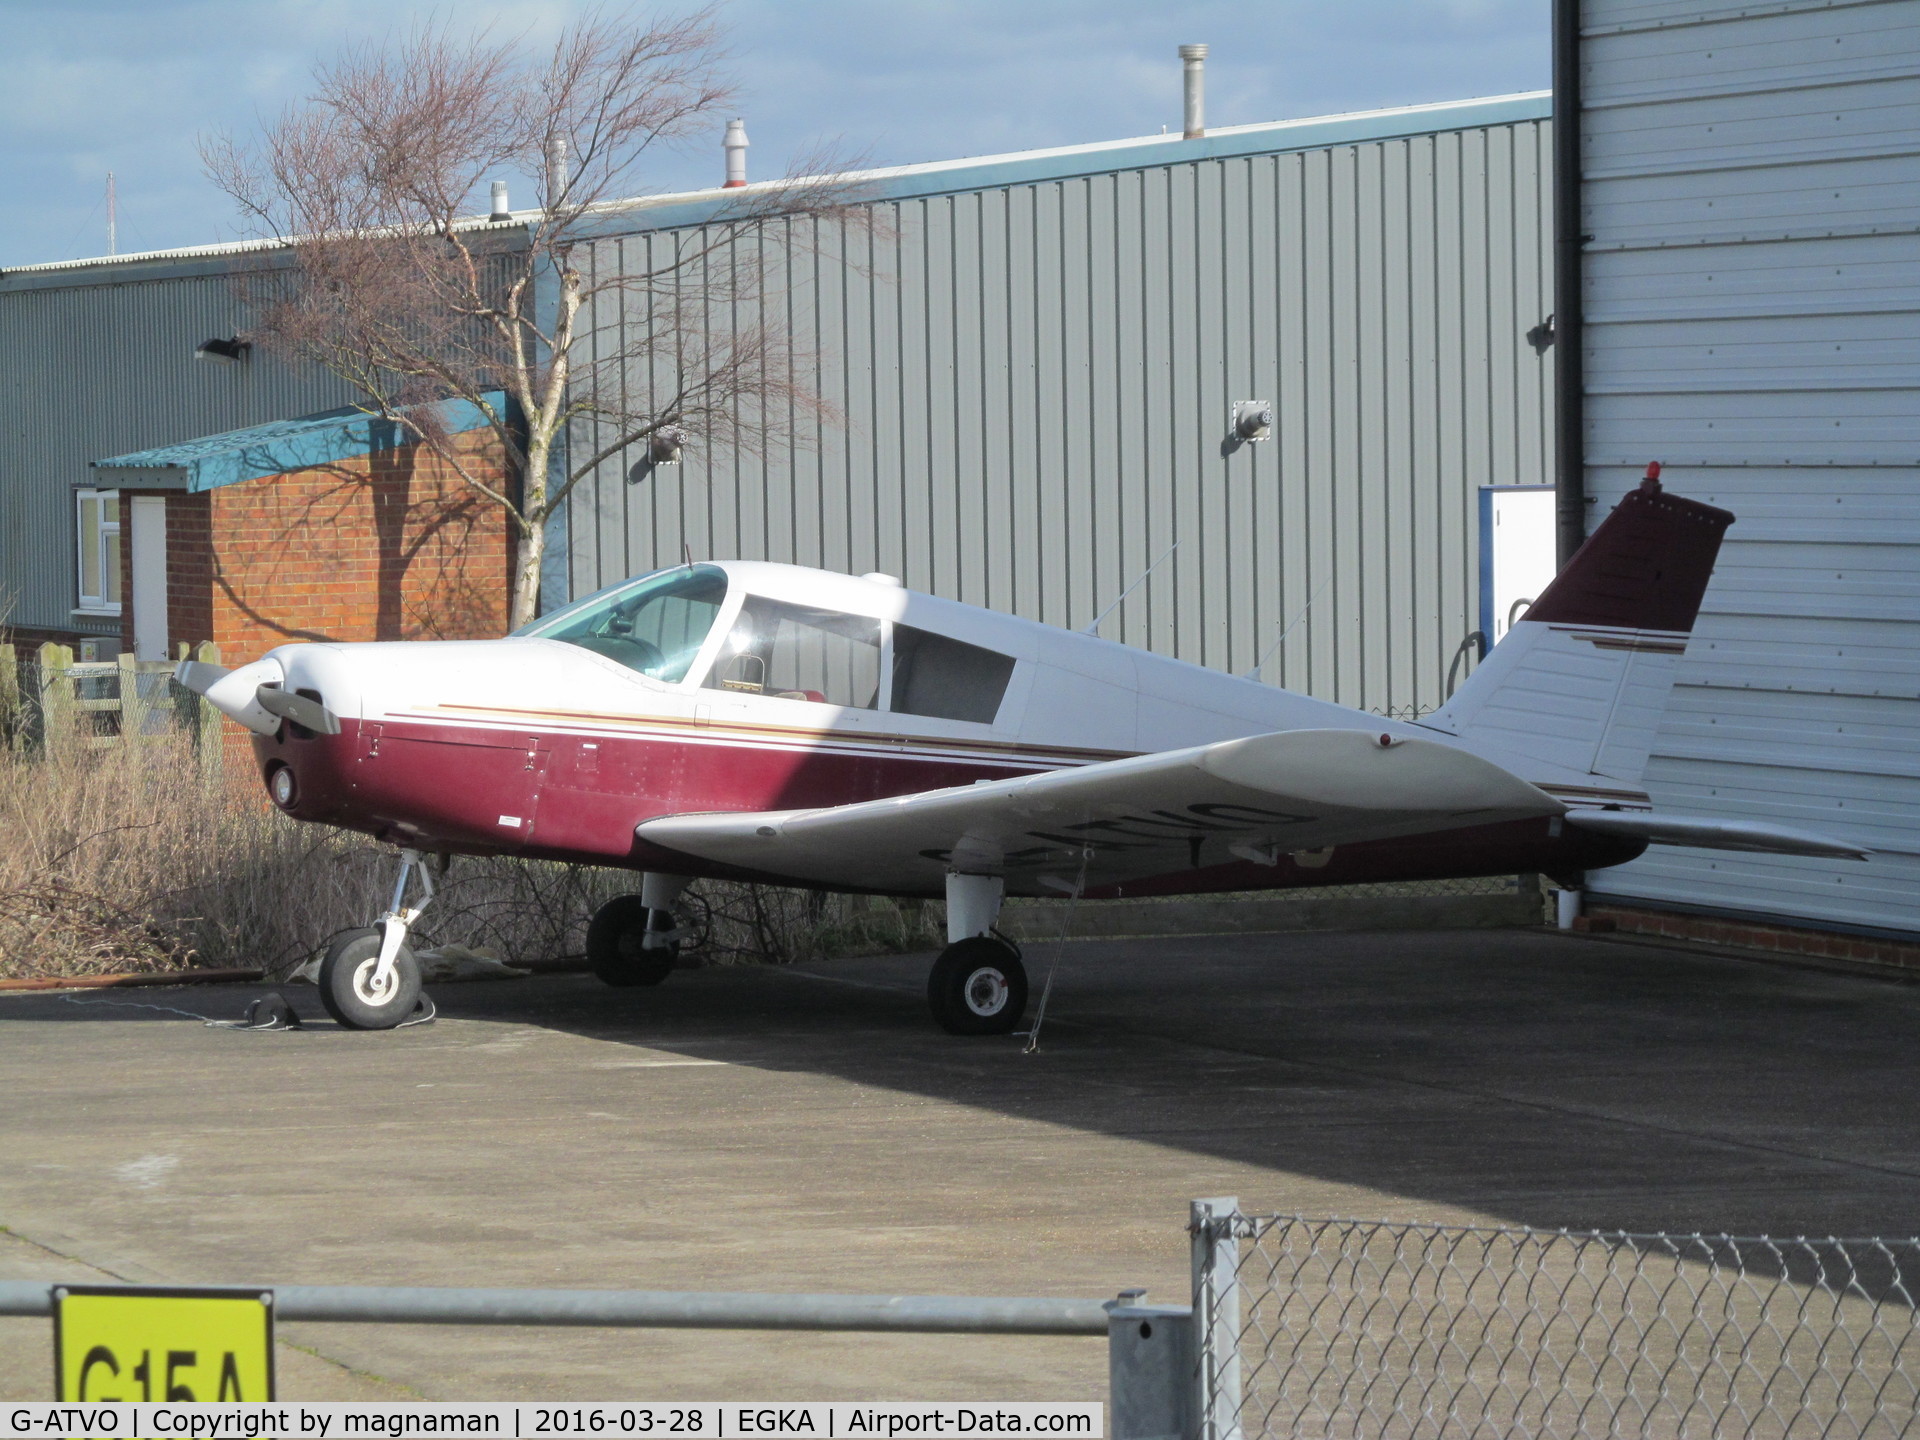 G-ATVO, 1966 Piper PA-28-140 Cherokee C/N 28-22020, oldie keeping out of the way